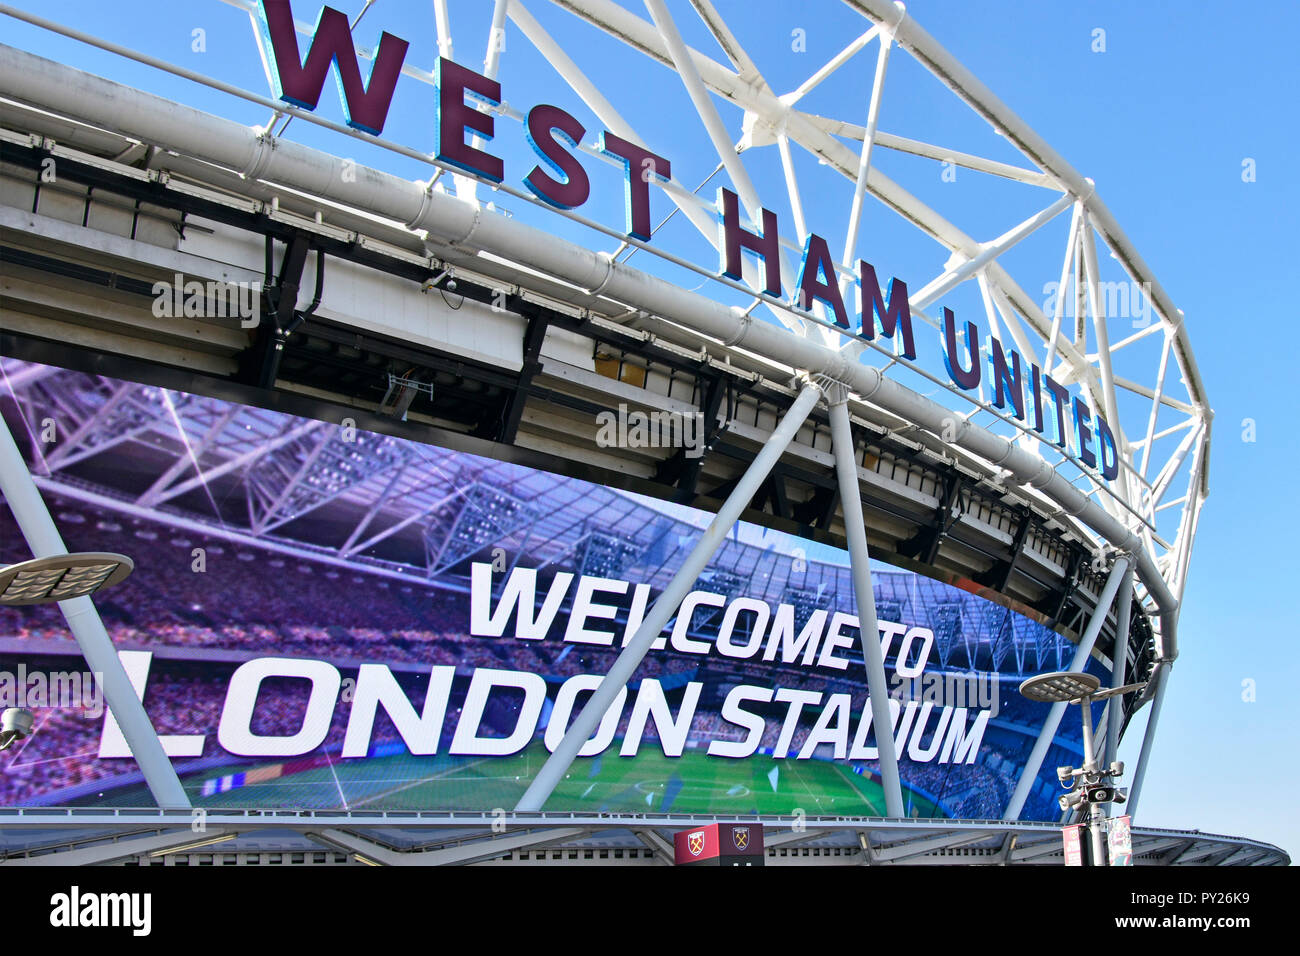 Welcome sign for London Stadium on giant outdoor television screen below West Ham United sign Olympic stadium Queen Elizabeth Olympic park England UK Stock Photo